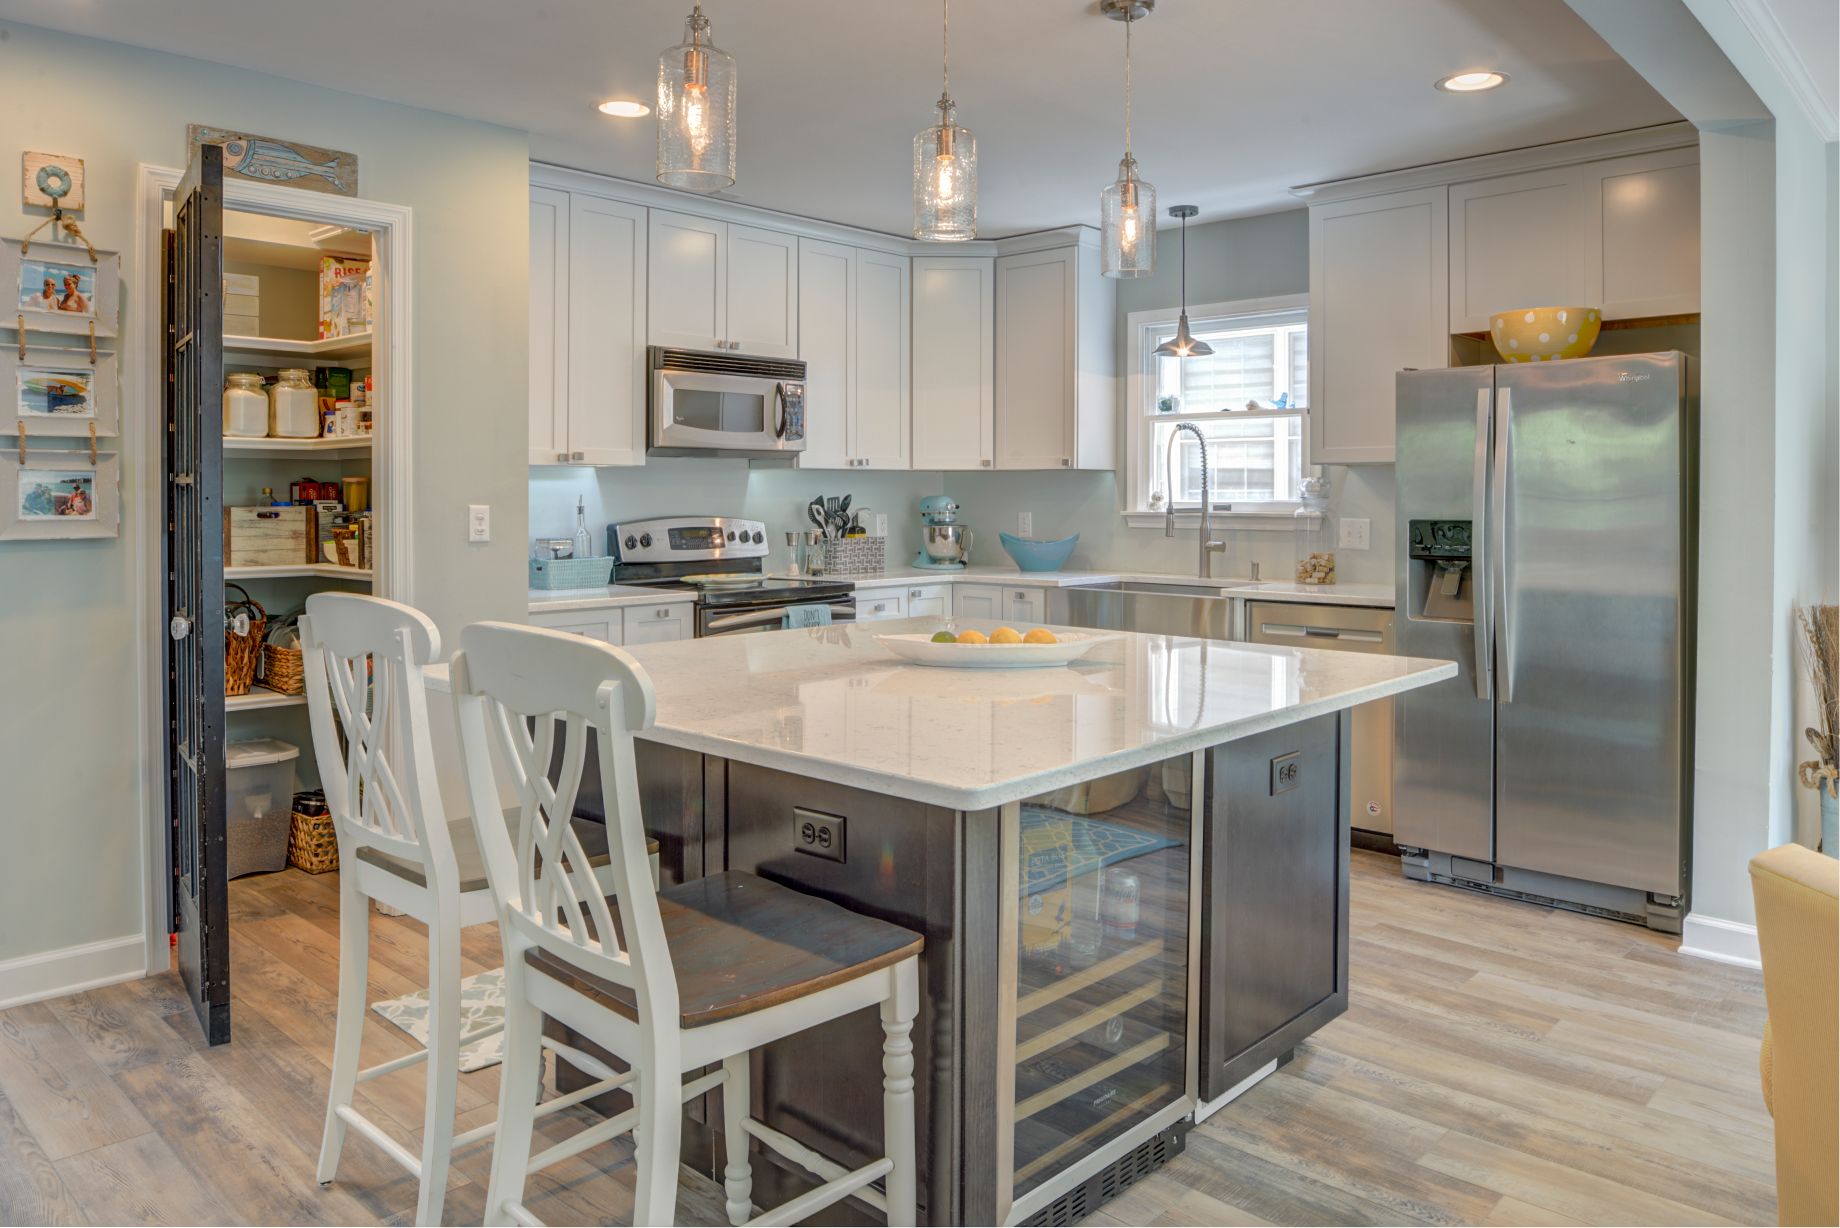 Renovation in Canal Drive, Millsboro DE with Center Island and White Countertop